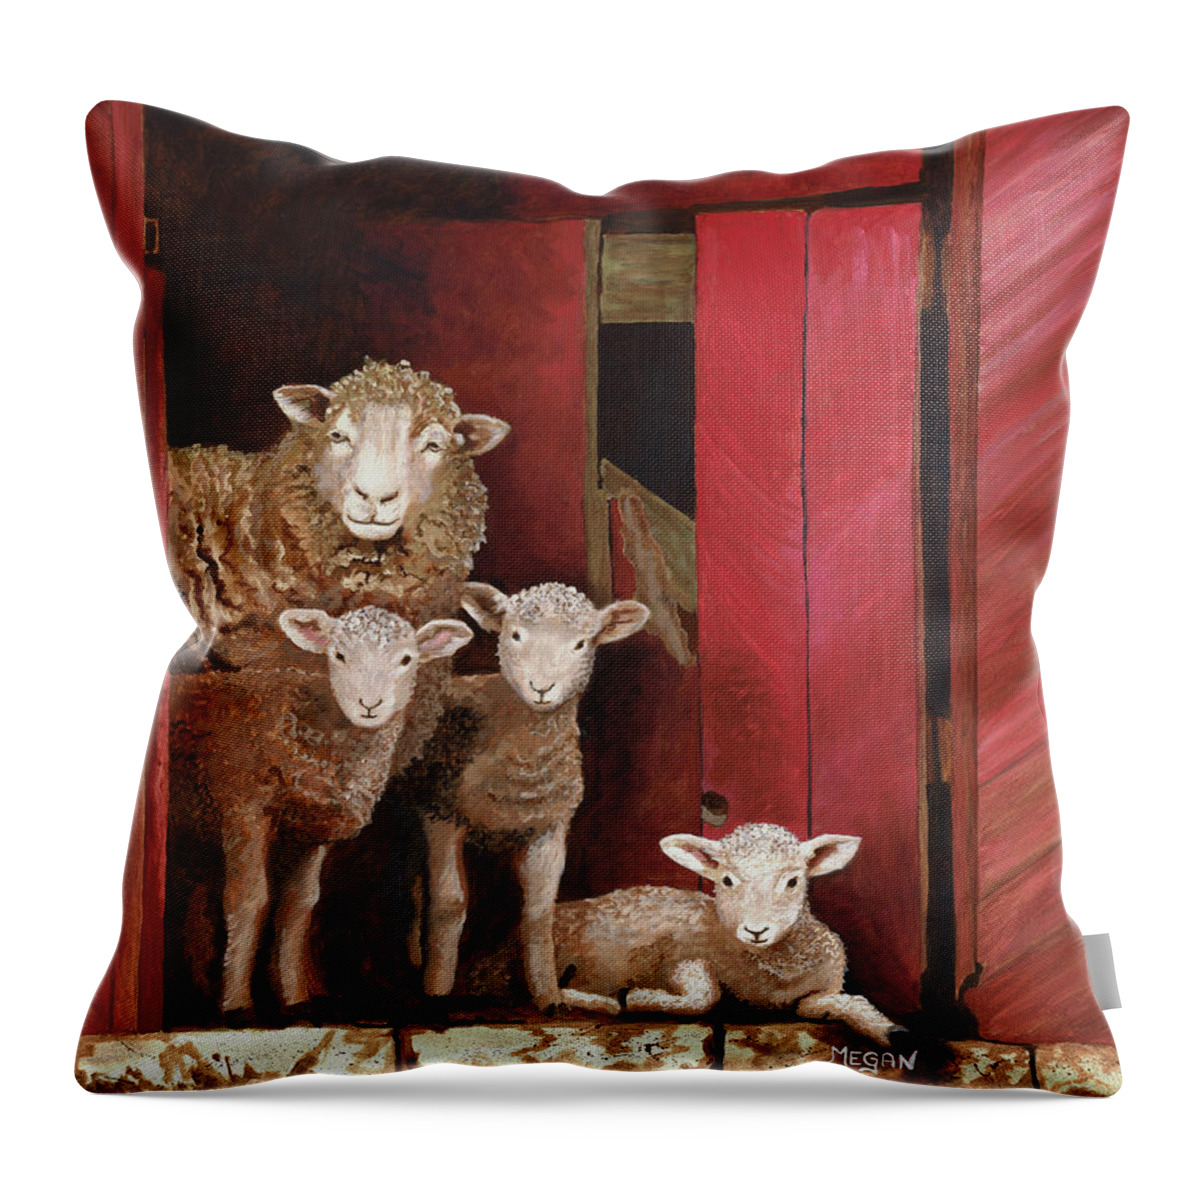 Sheep Throw Pillow featuring the painting Family Portrait by Megan Collins